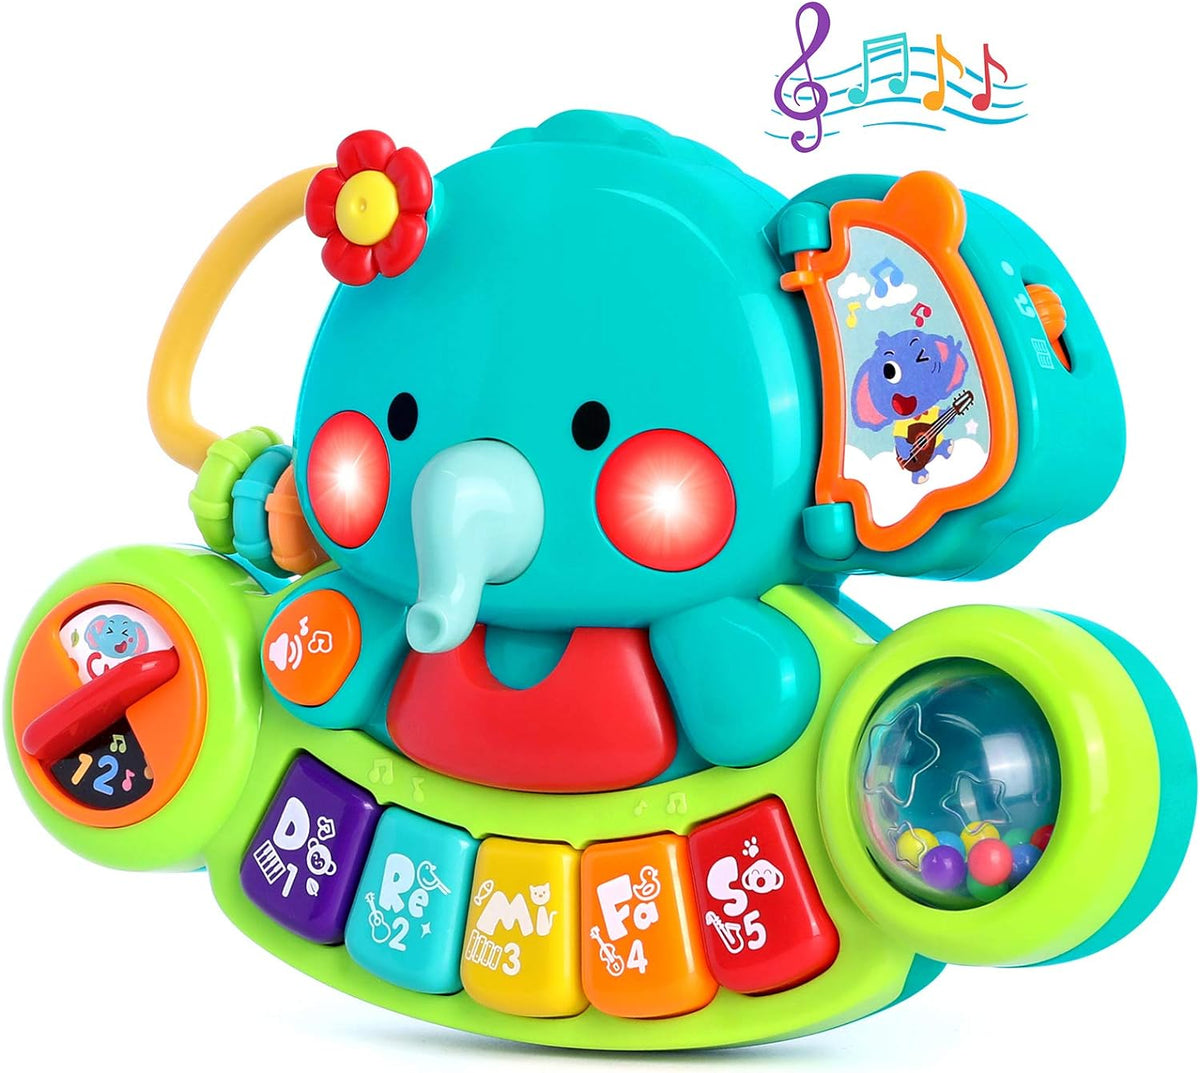 Baby Piano Toy Elephant Light Up Music Baby Toys